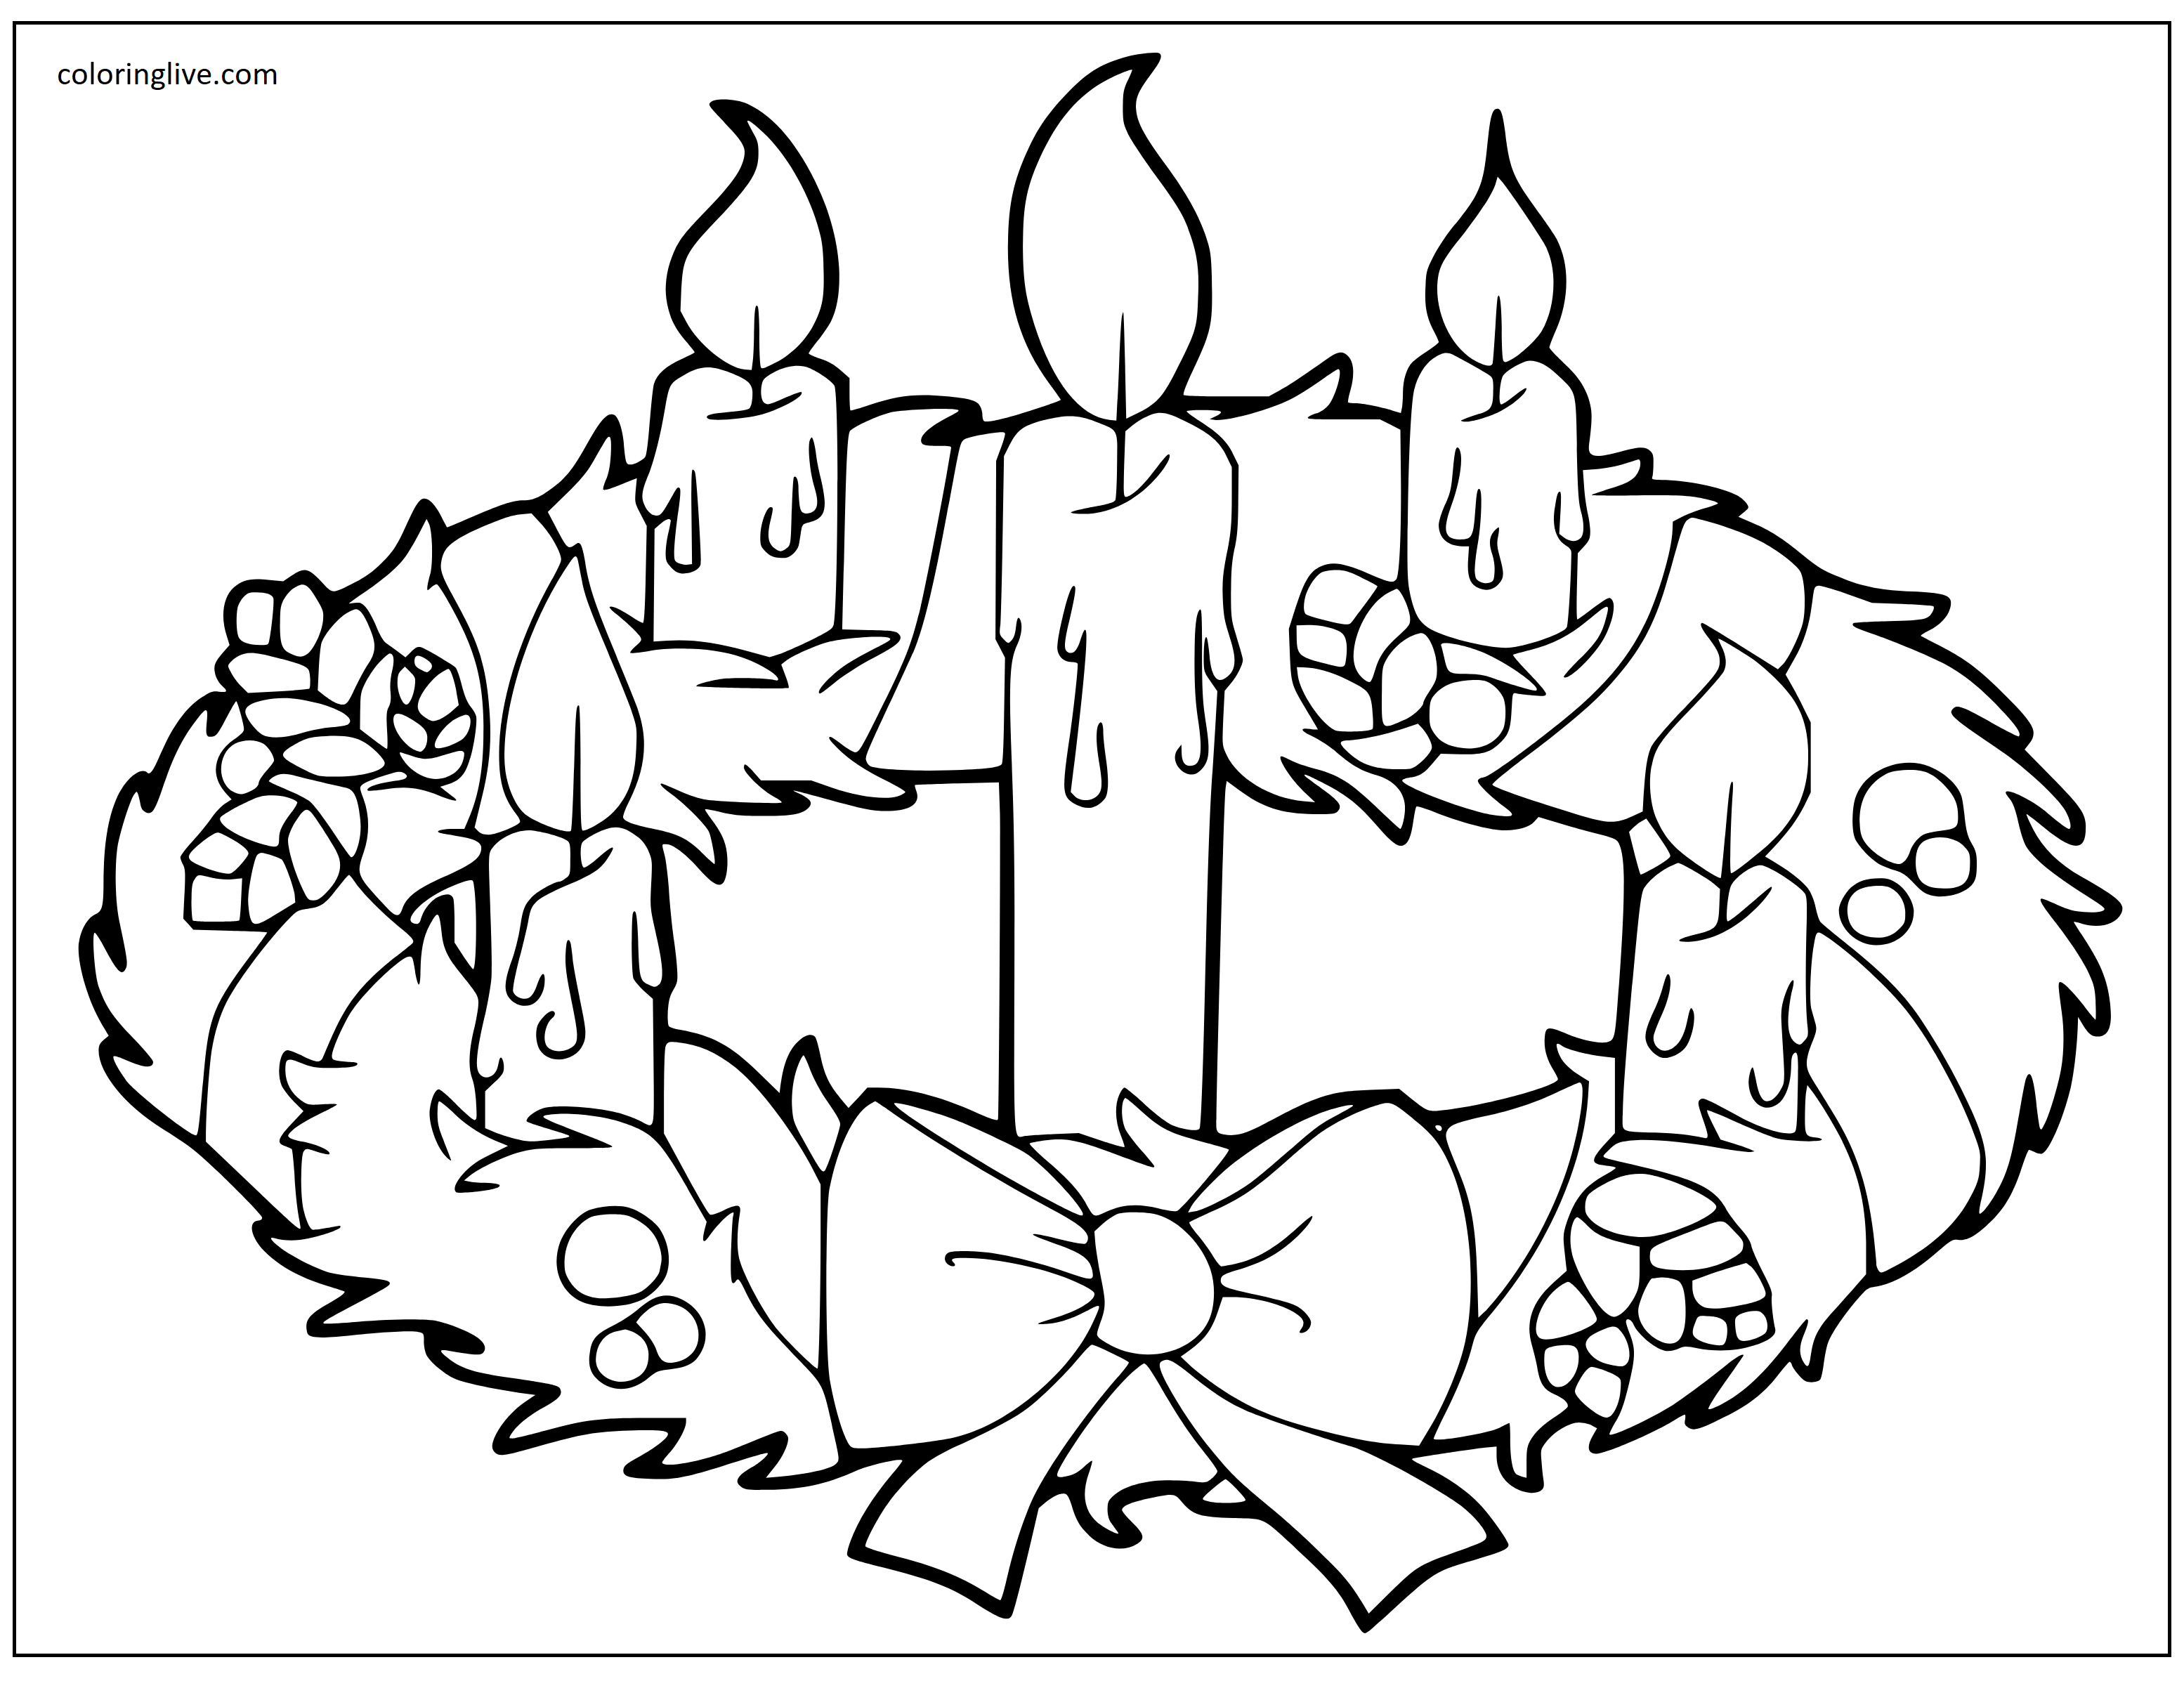 Printable Christmas Wreath with Candles Coloring Page for kids.